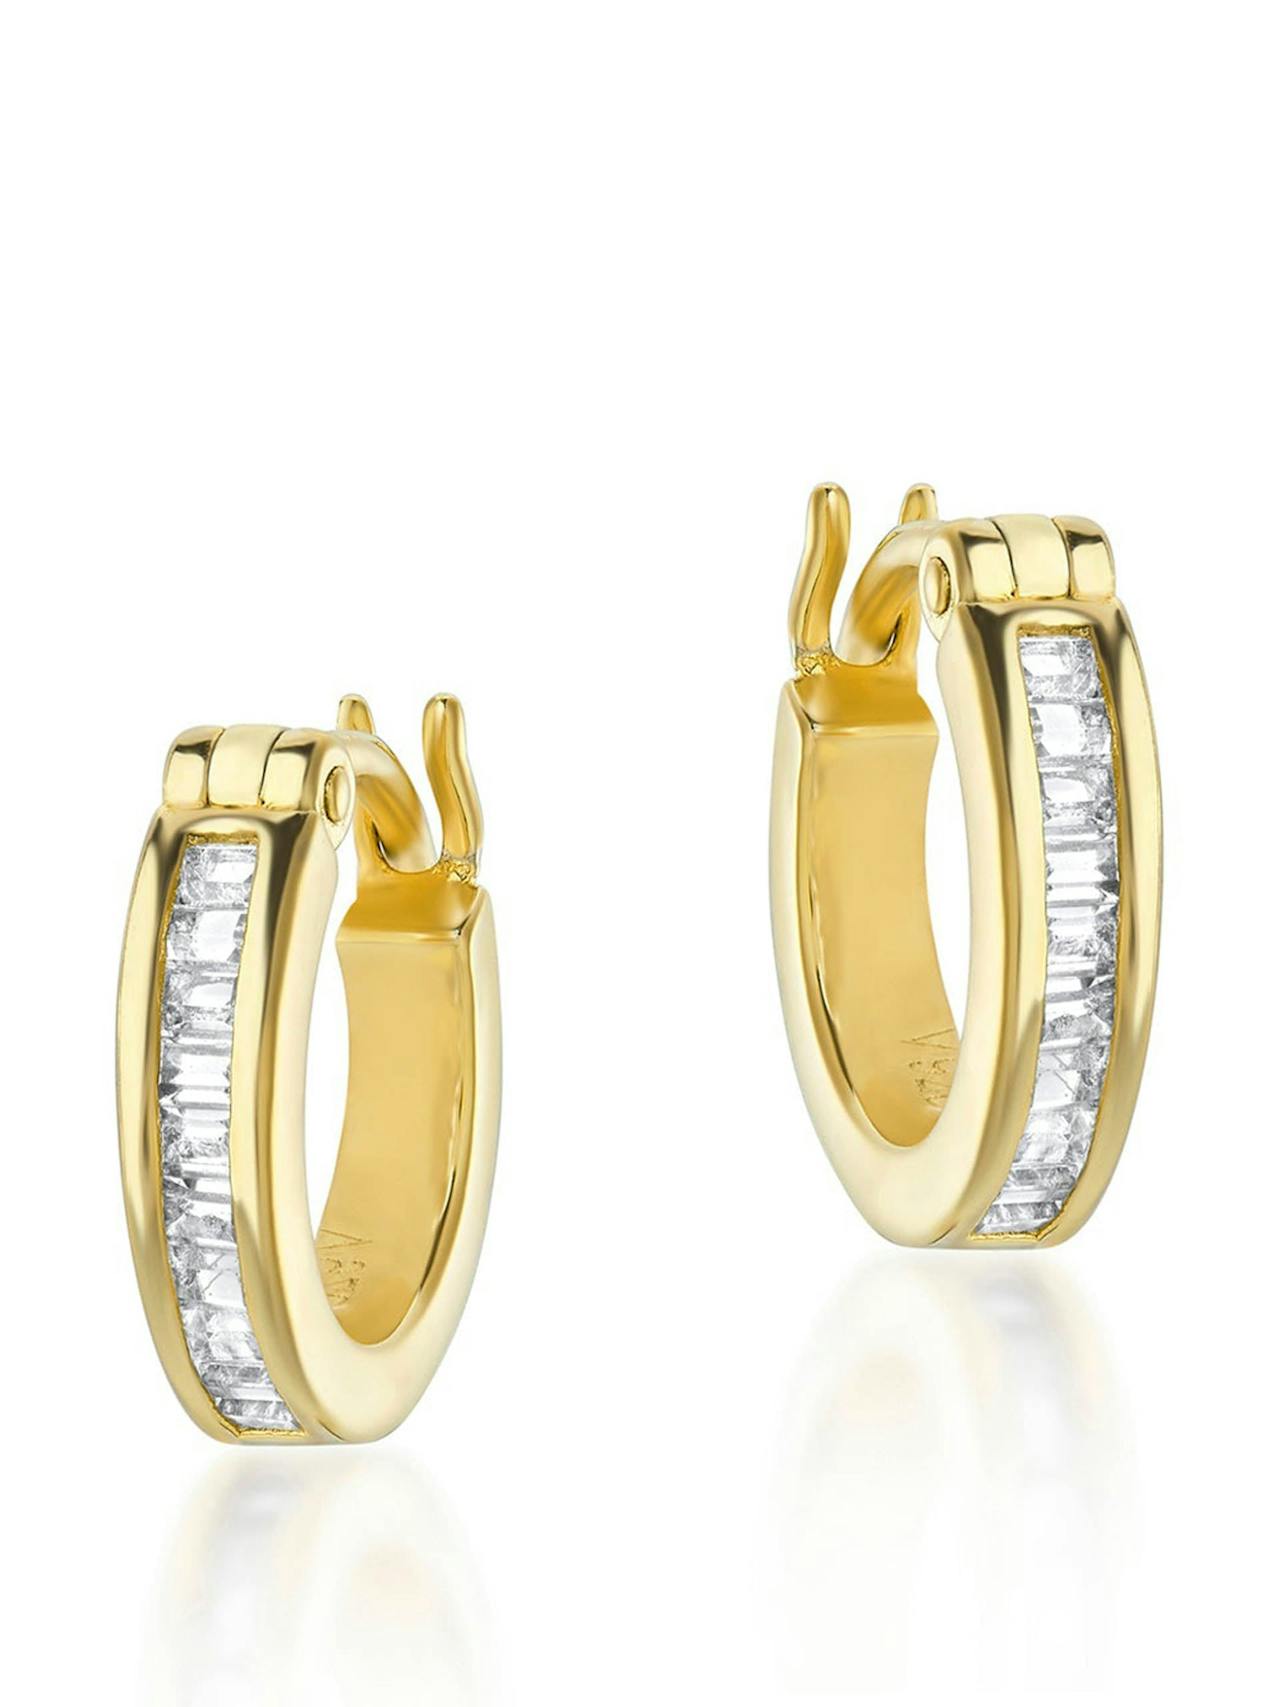 Gold Phoebe hoops with square cut white topaz